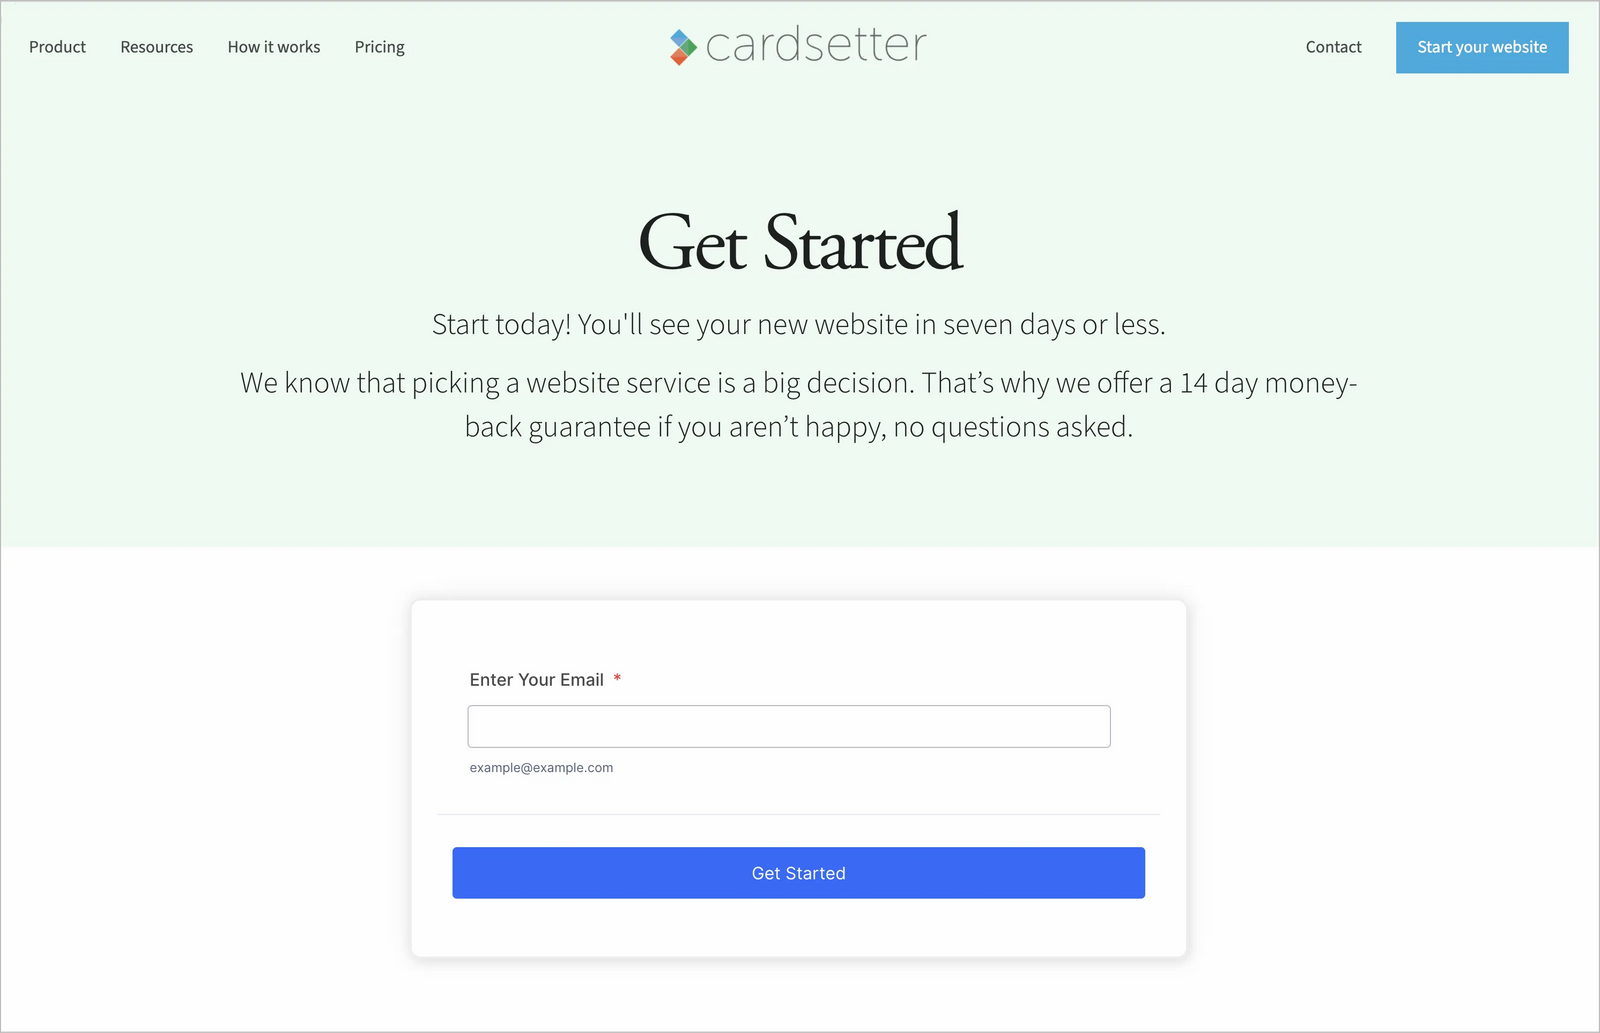 An example of a conversion page on the Cardsetter website.